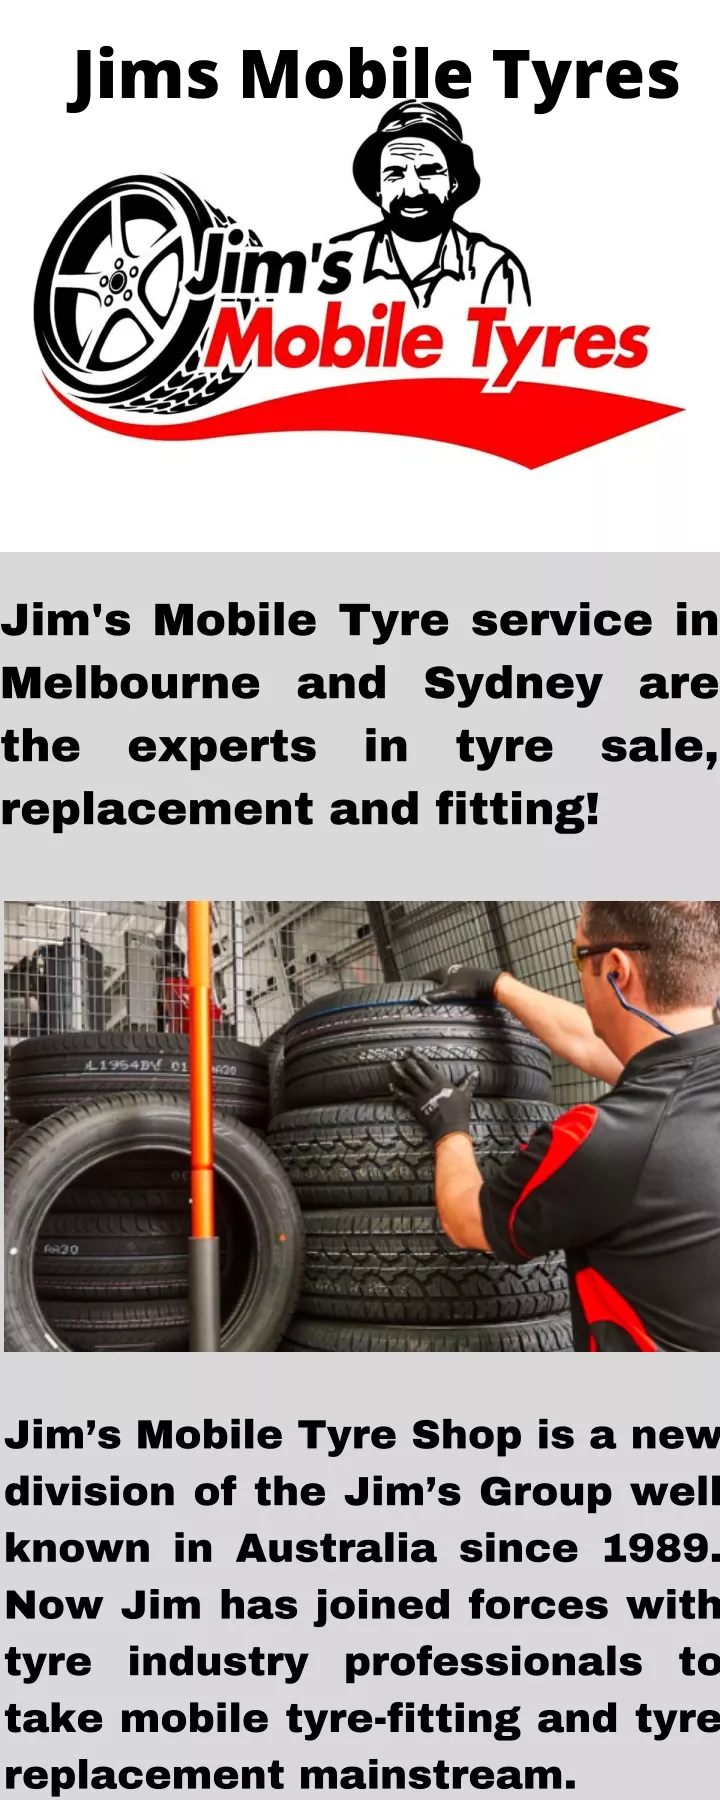 jims mobile tyres